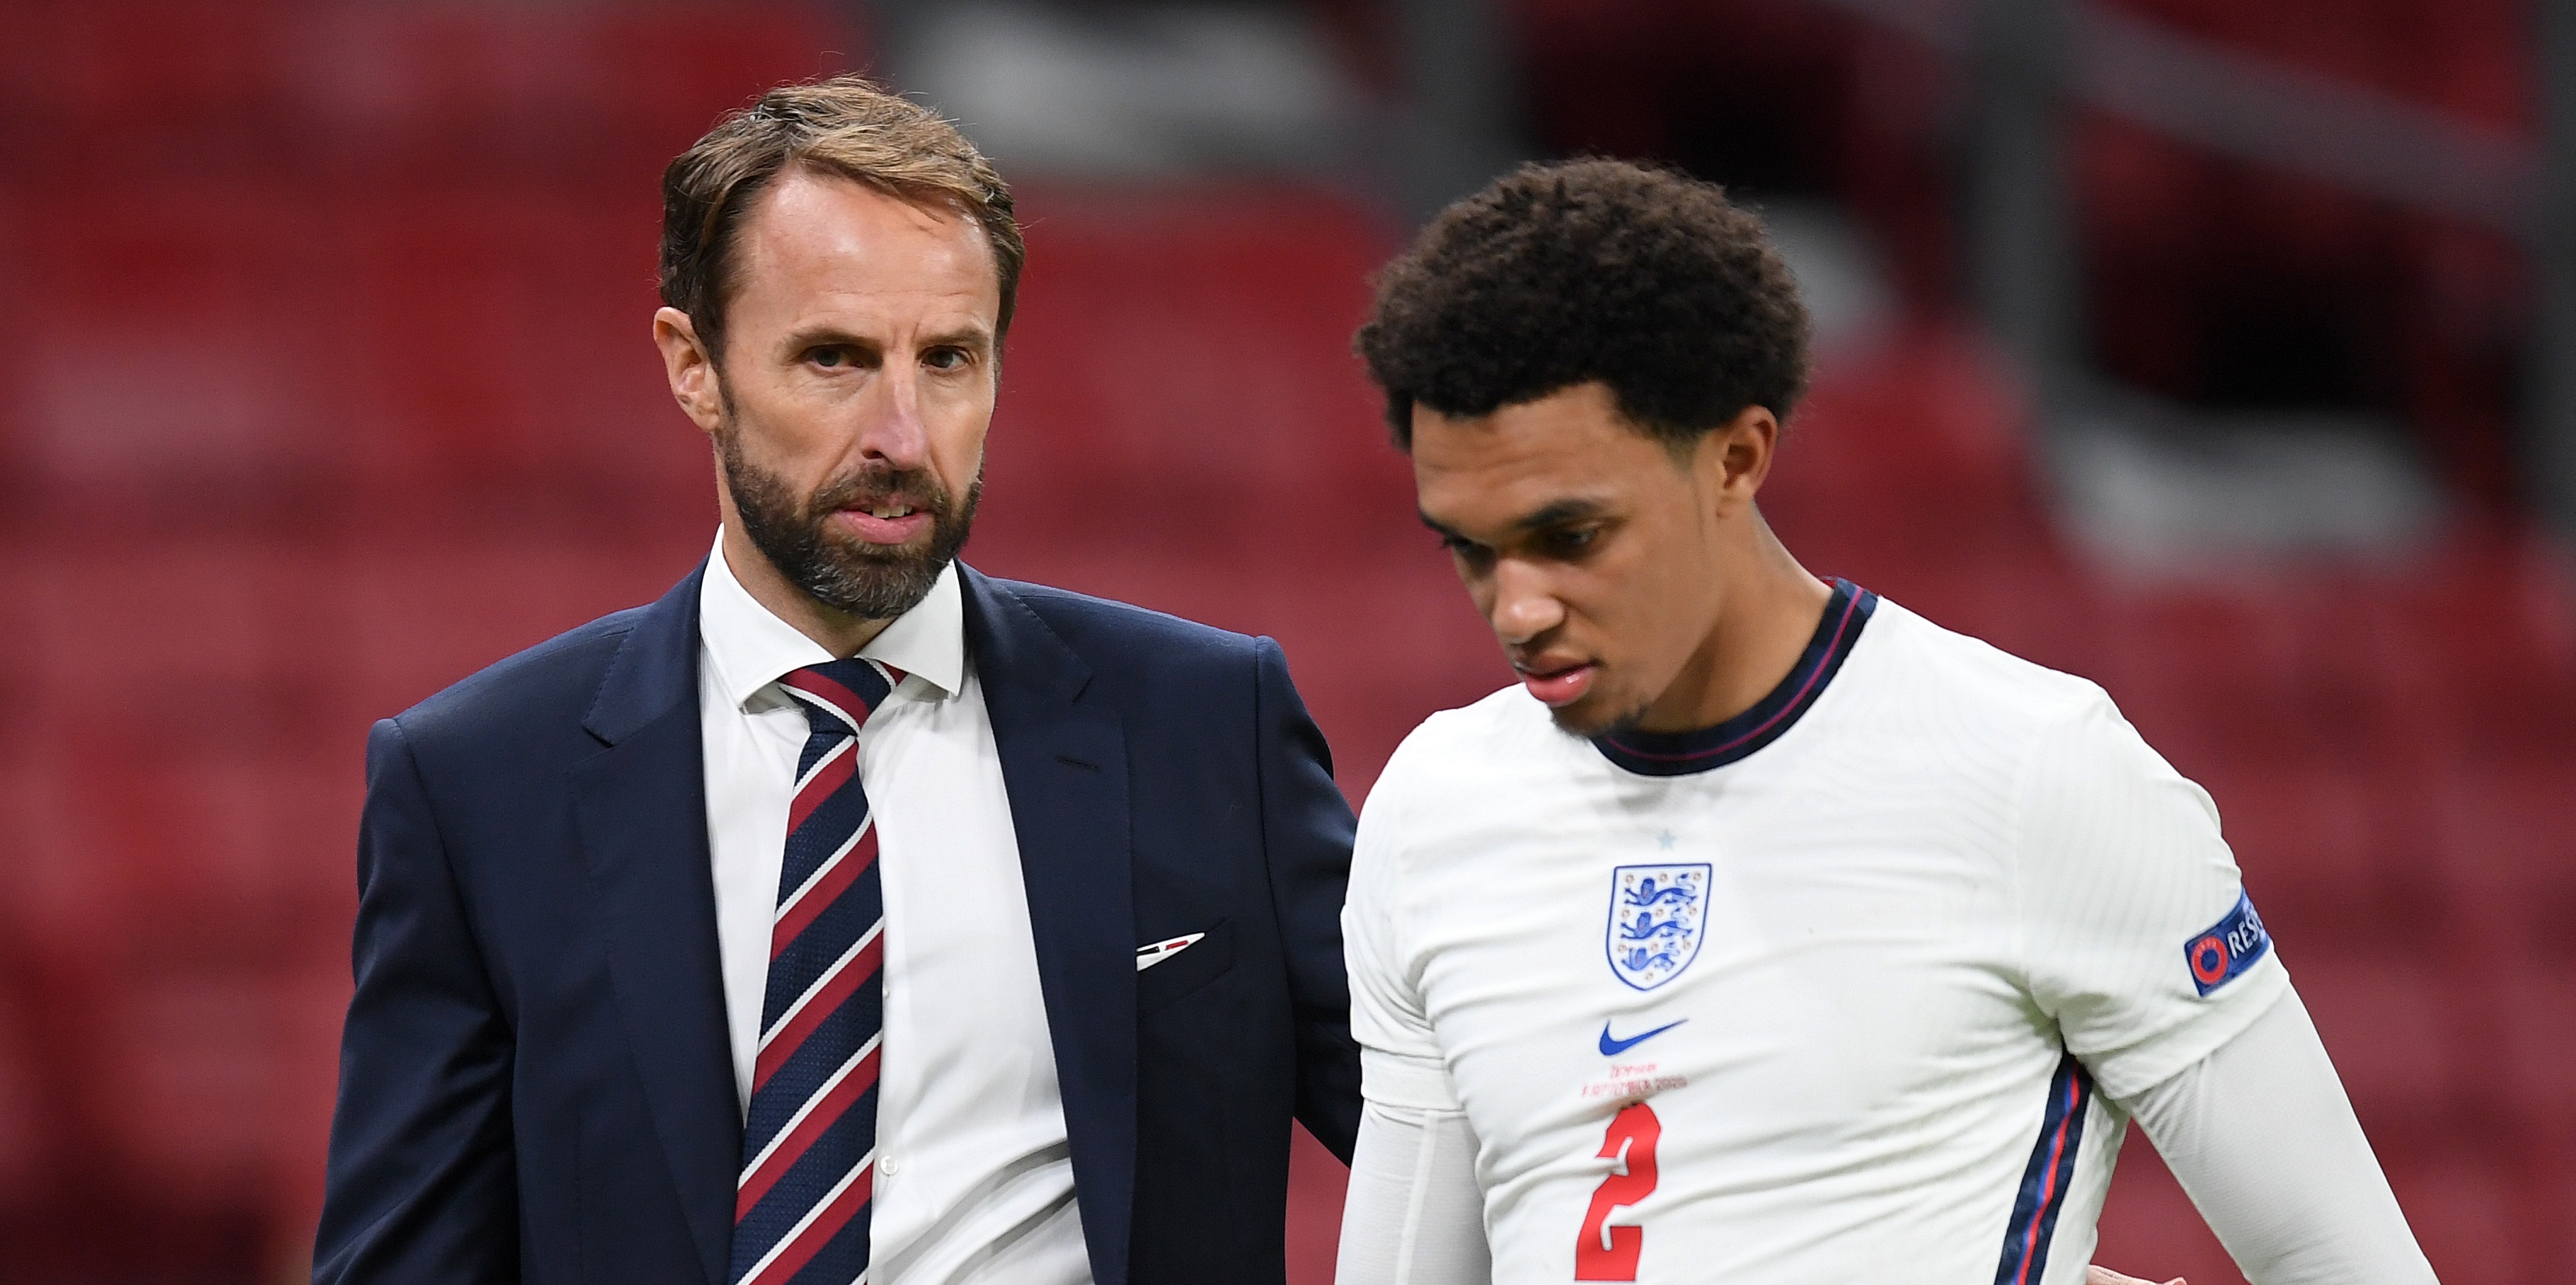 Micah Richards sends Alexander-Arnold message Southgate can’t ignore ahead of World Cup squad selection